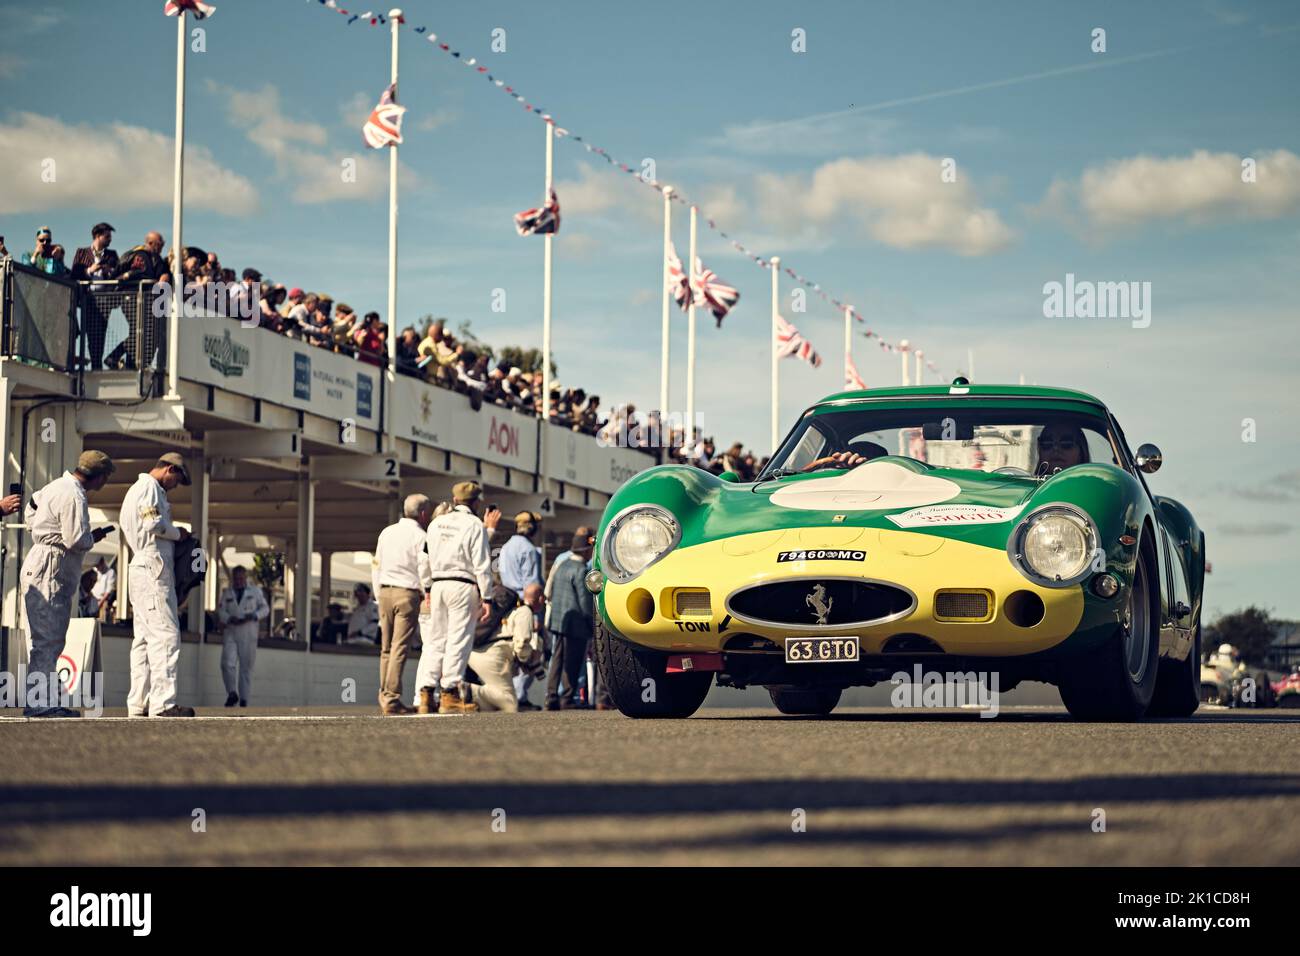 Goodwood, Chichester, UK. 17th Sept, 2022. British Formula One legend Sir Jackie Stewart drives a Ferrari GTO during the 2022 Goodwood Revival (Photo by Gergo Toth / Alamy Live News) Stock Photo